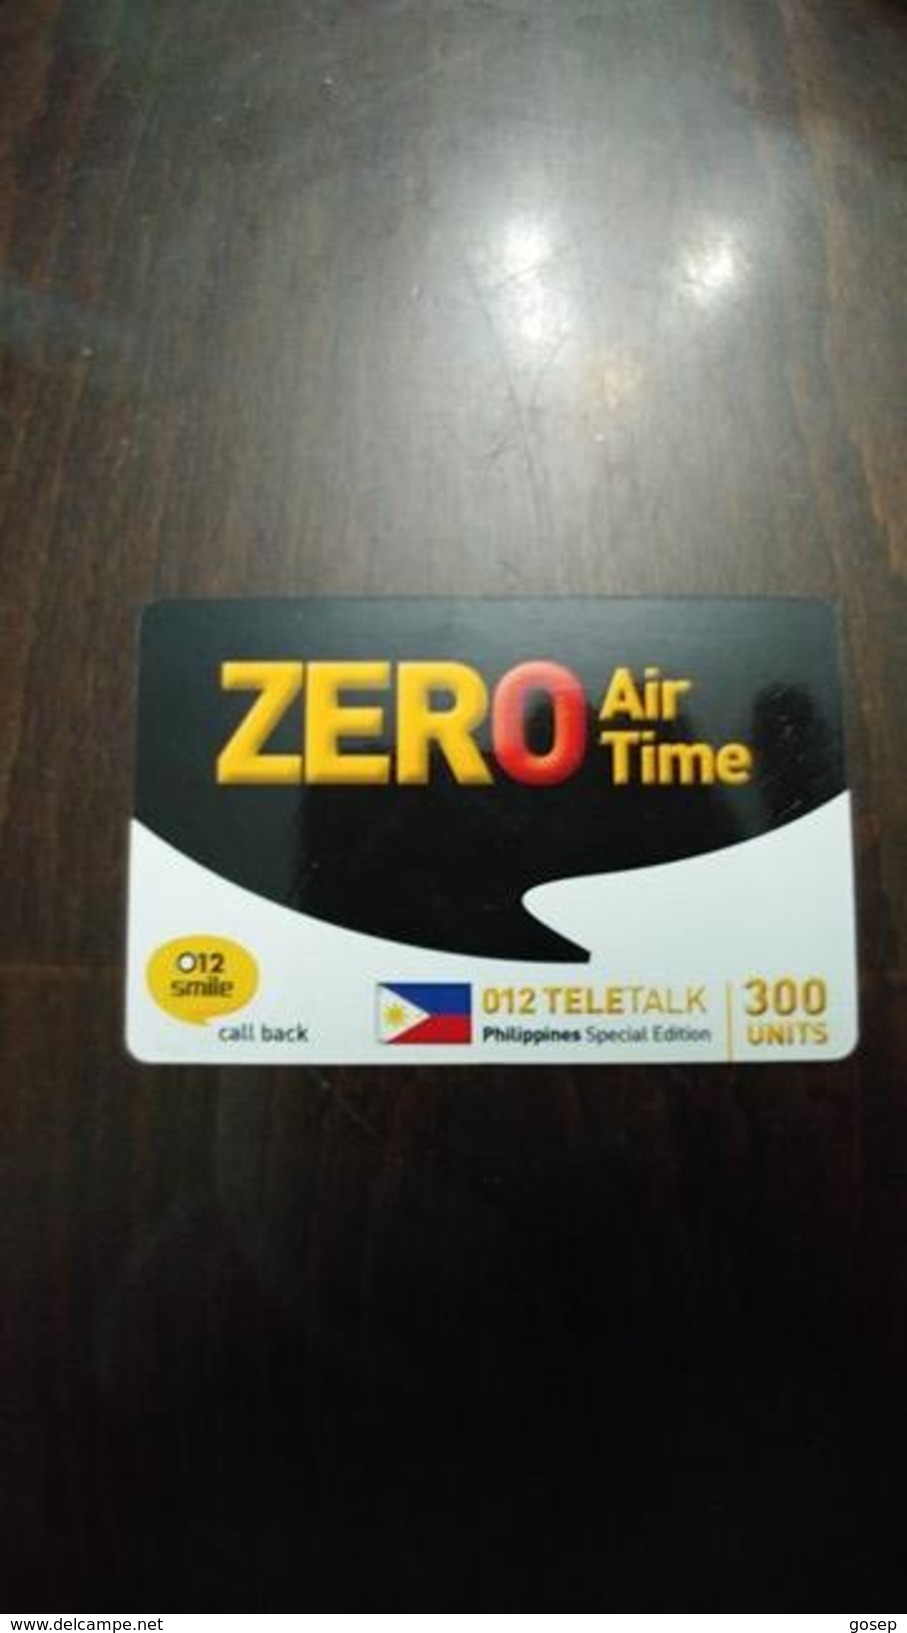 Israel-ZERO-air Time-(35)-012 Teletalk-philippines Special Edition-(300units)-(012smile Call Back)-out Side - Philippines